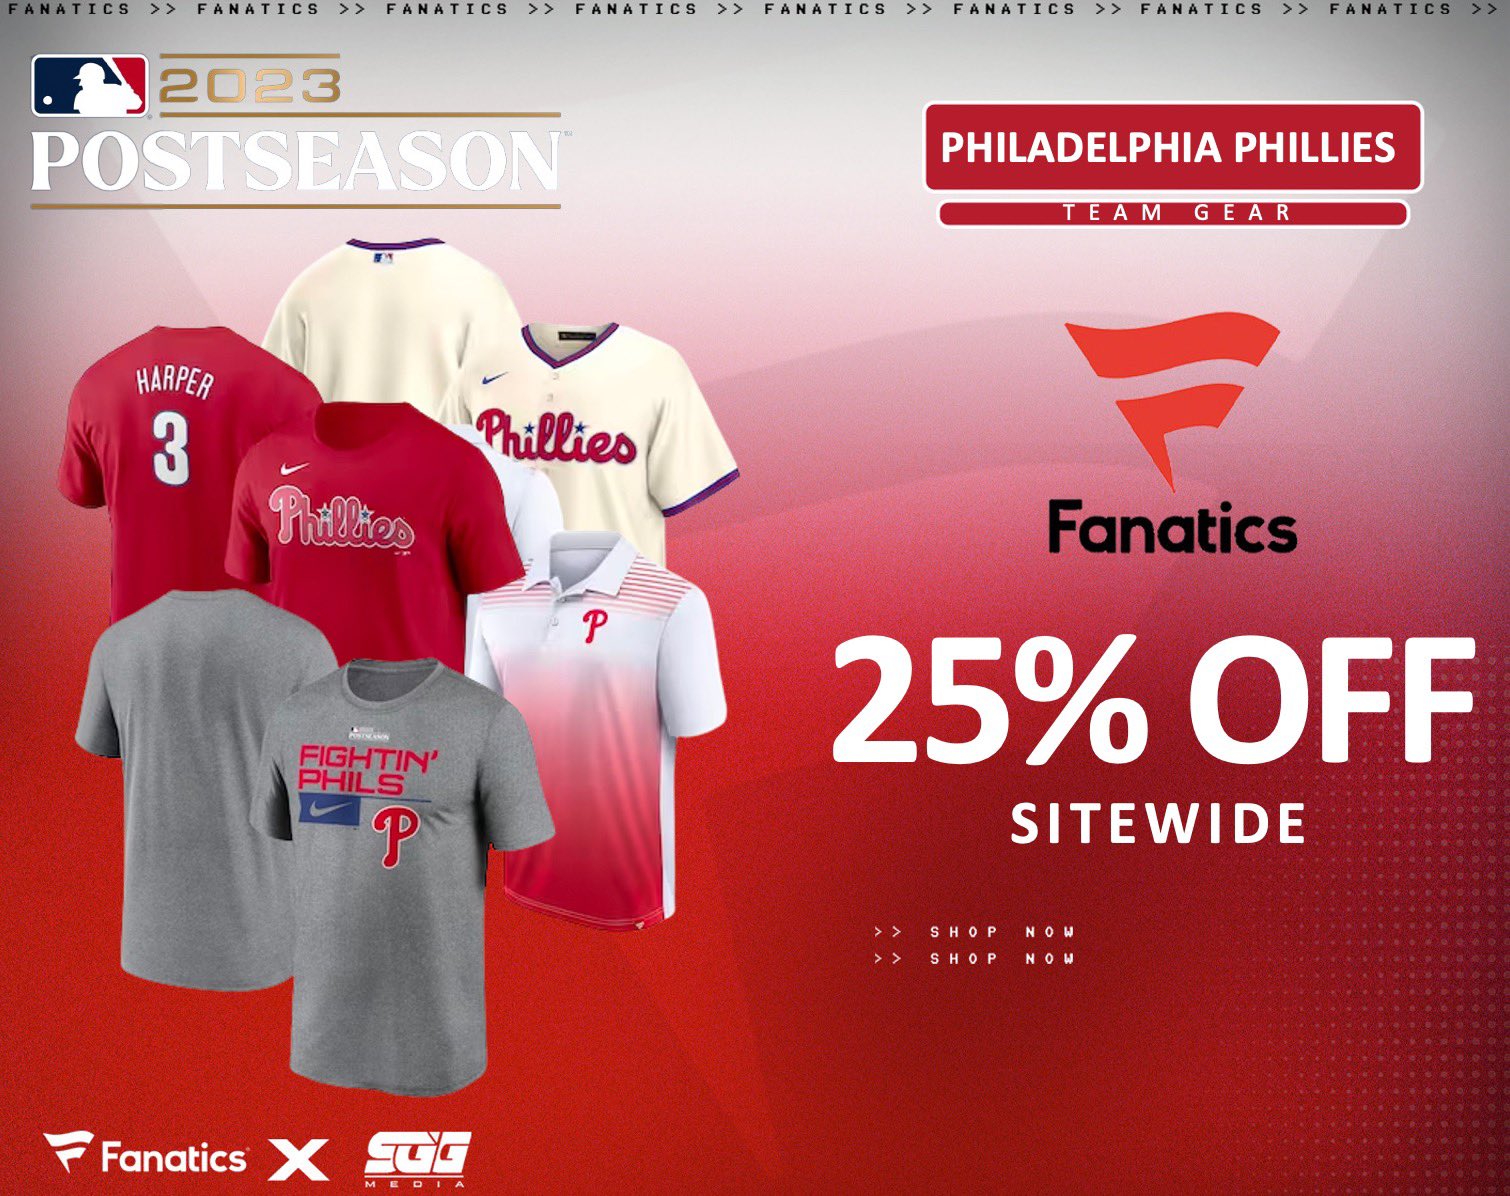 SGG Promos on X: MLB POSTSEASON SPECIAL, @Fanatics, 25% OFF PHILADELPHIA PHILLIES  GEAR🏆 PHILLIES FANS‼️ Gear up for MLB POSTSEASON with Fanatics latest  offer and get up to 25% OFF using THIS